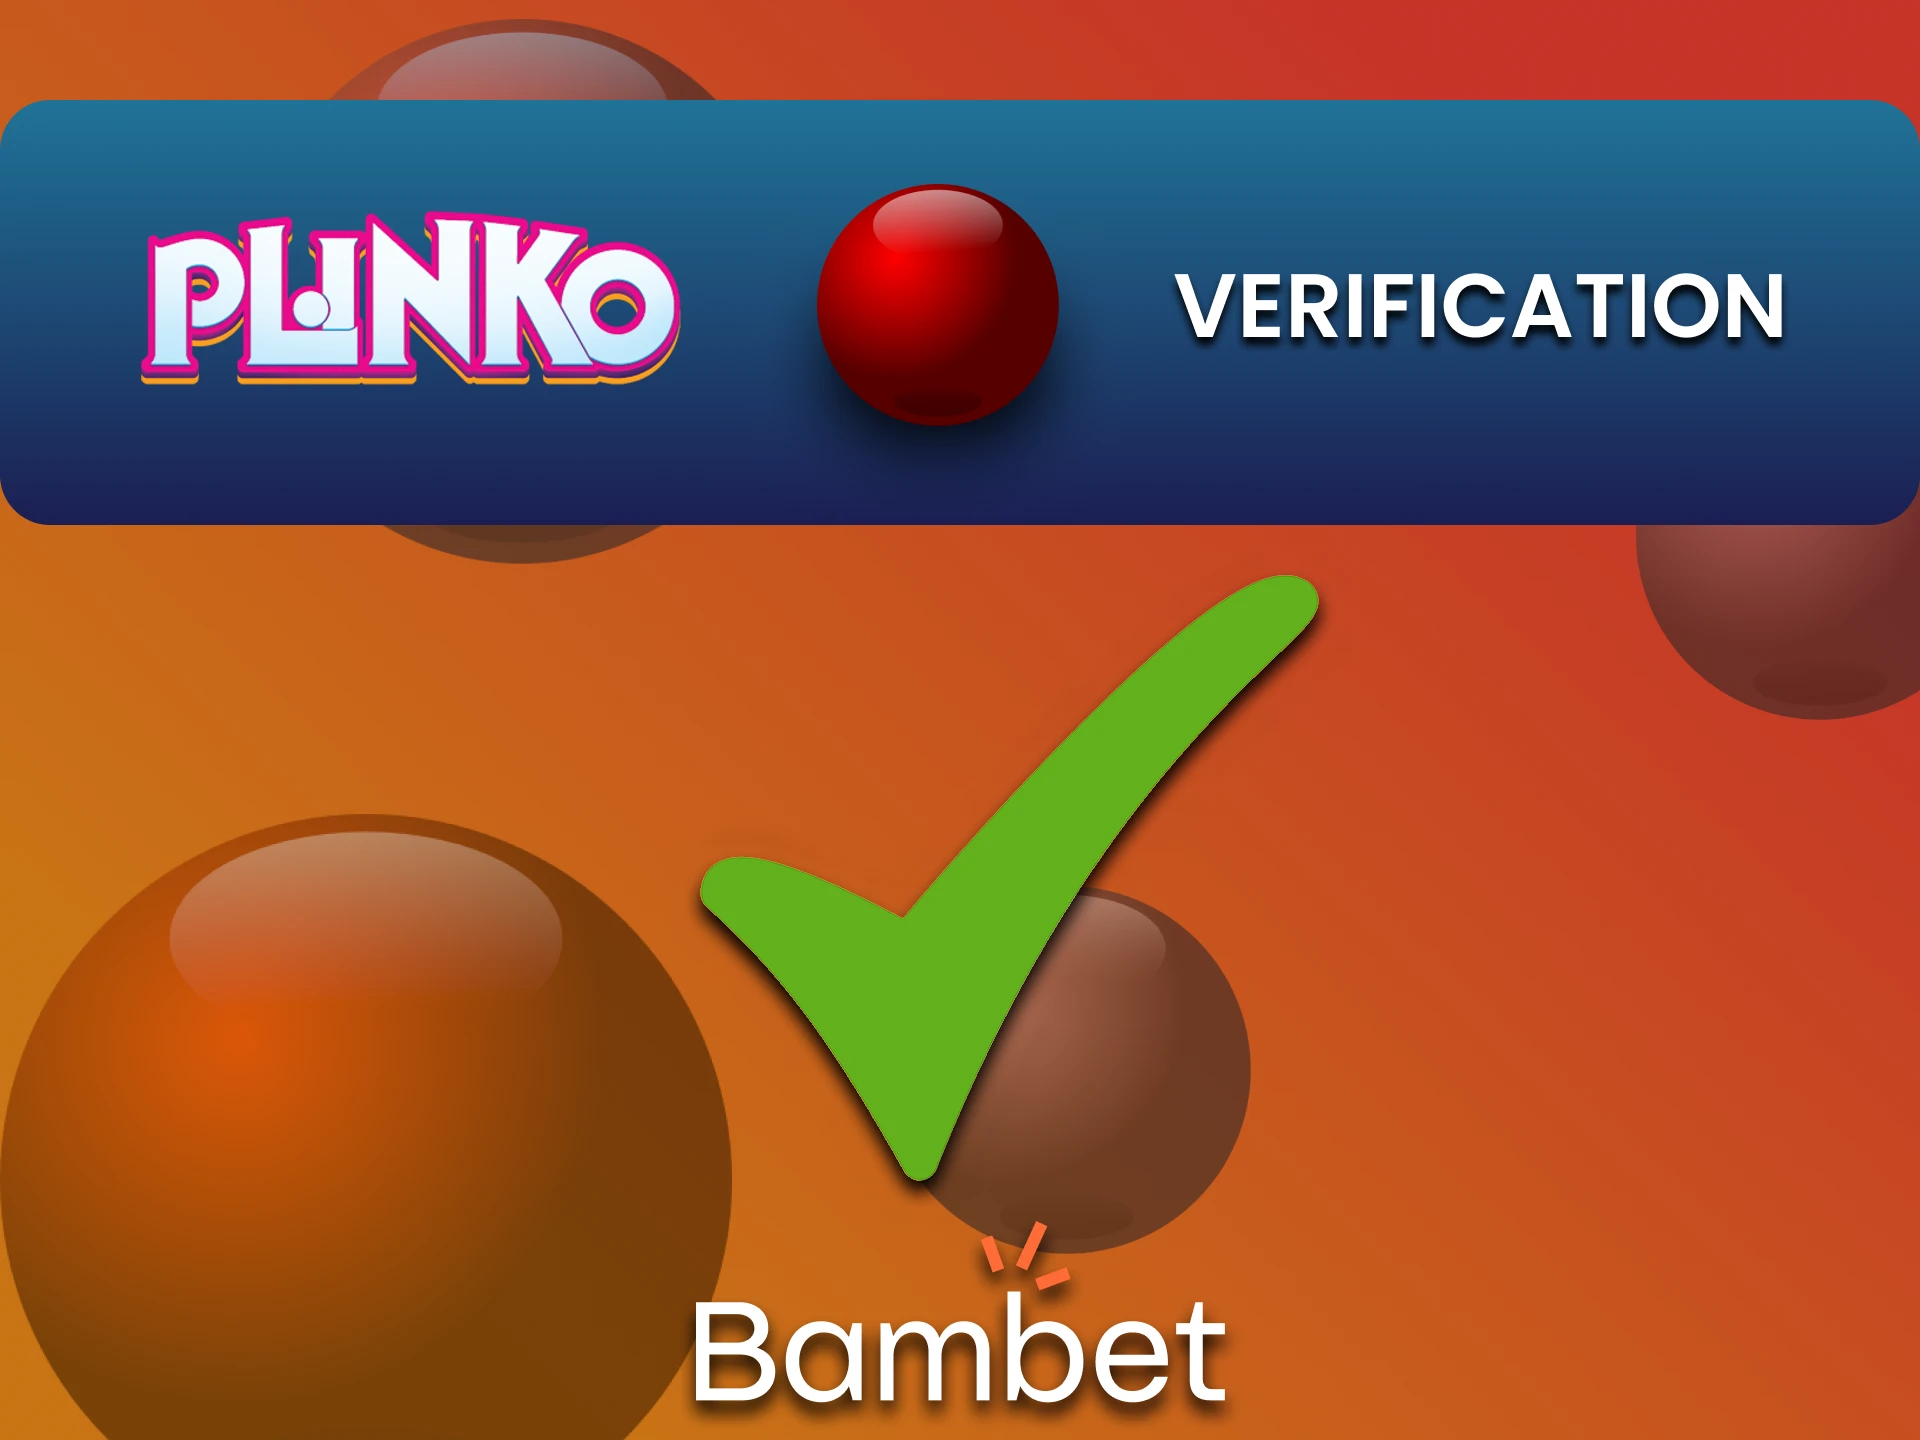 To play Plinko you need to fill in your data on Bambet.